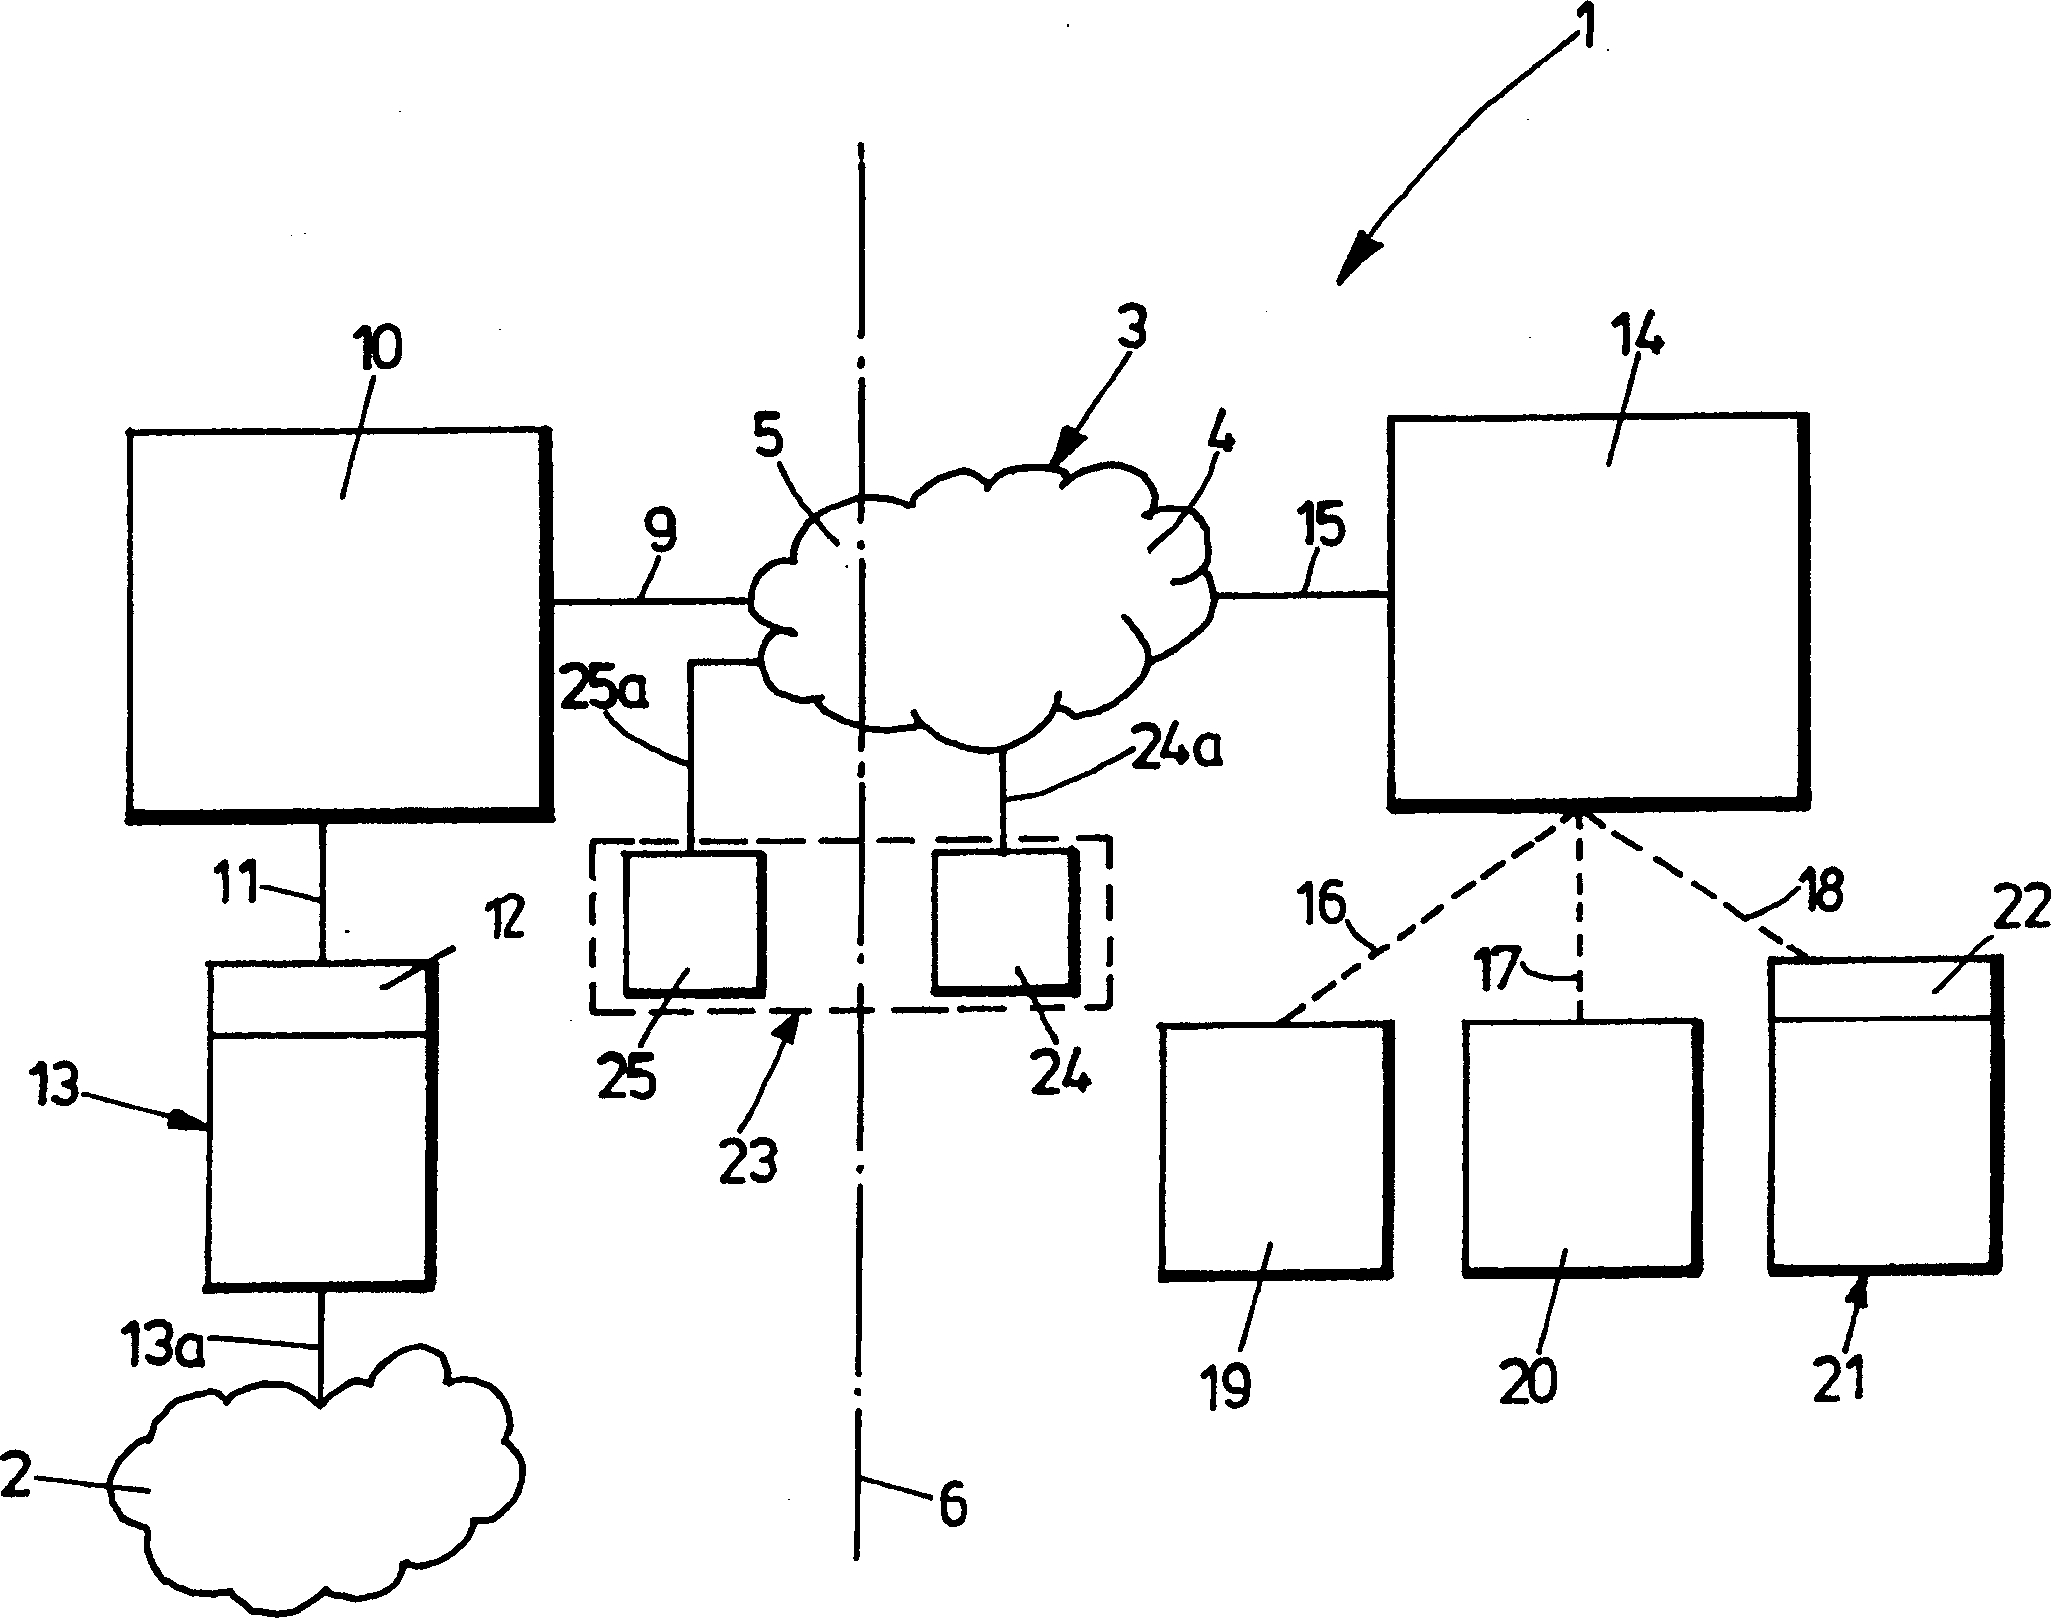 Test system for checking transmission processes in a mobile radio network, and method for authenticating a mobile telephone using one such test system